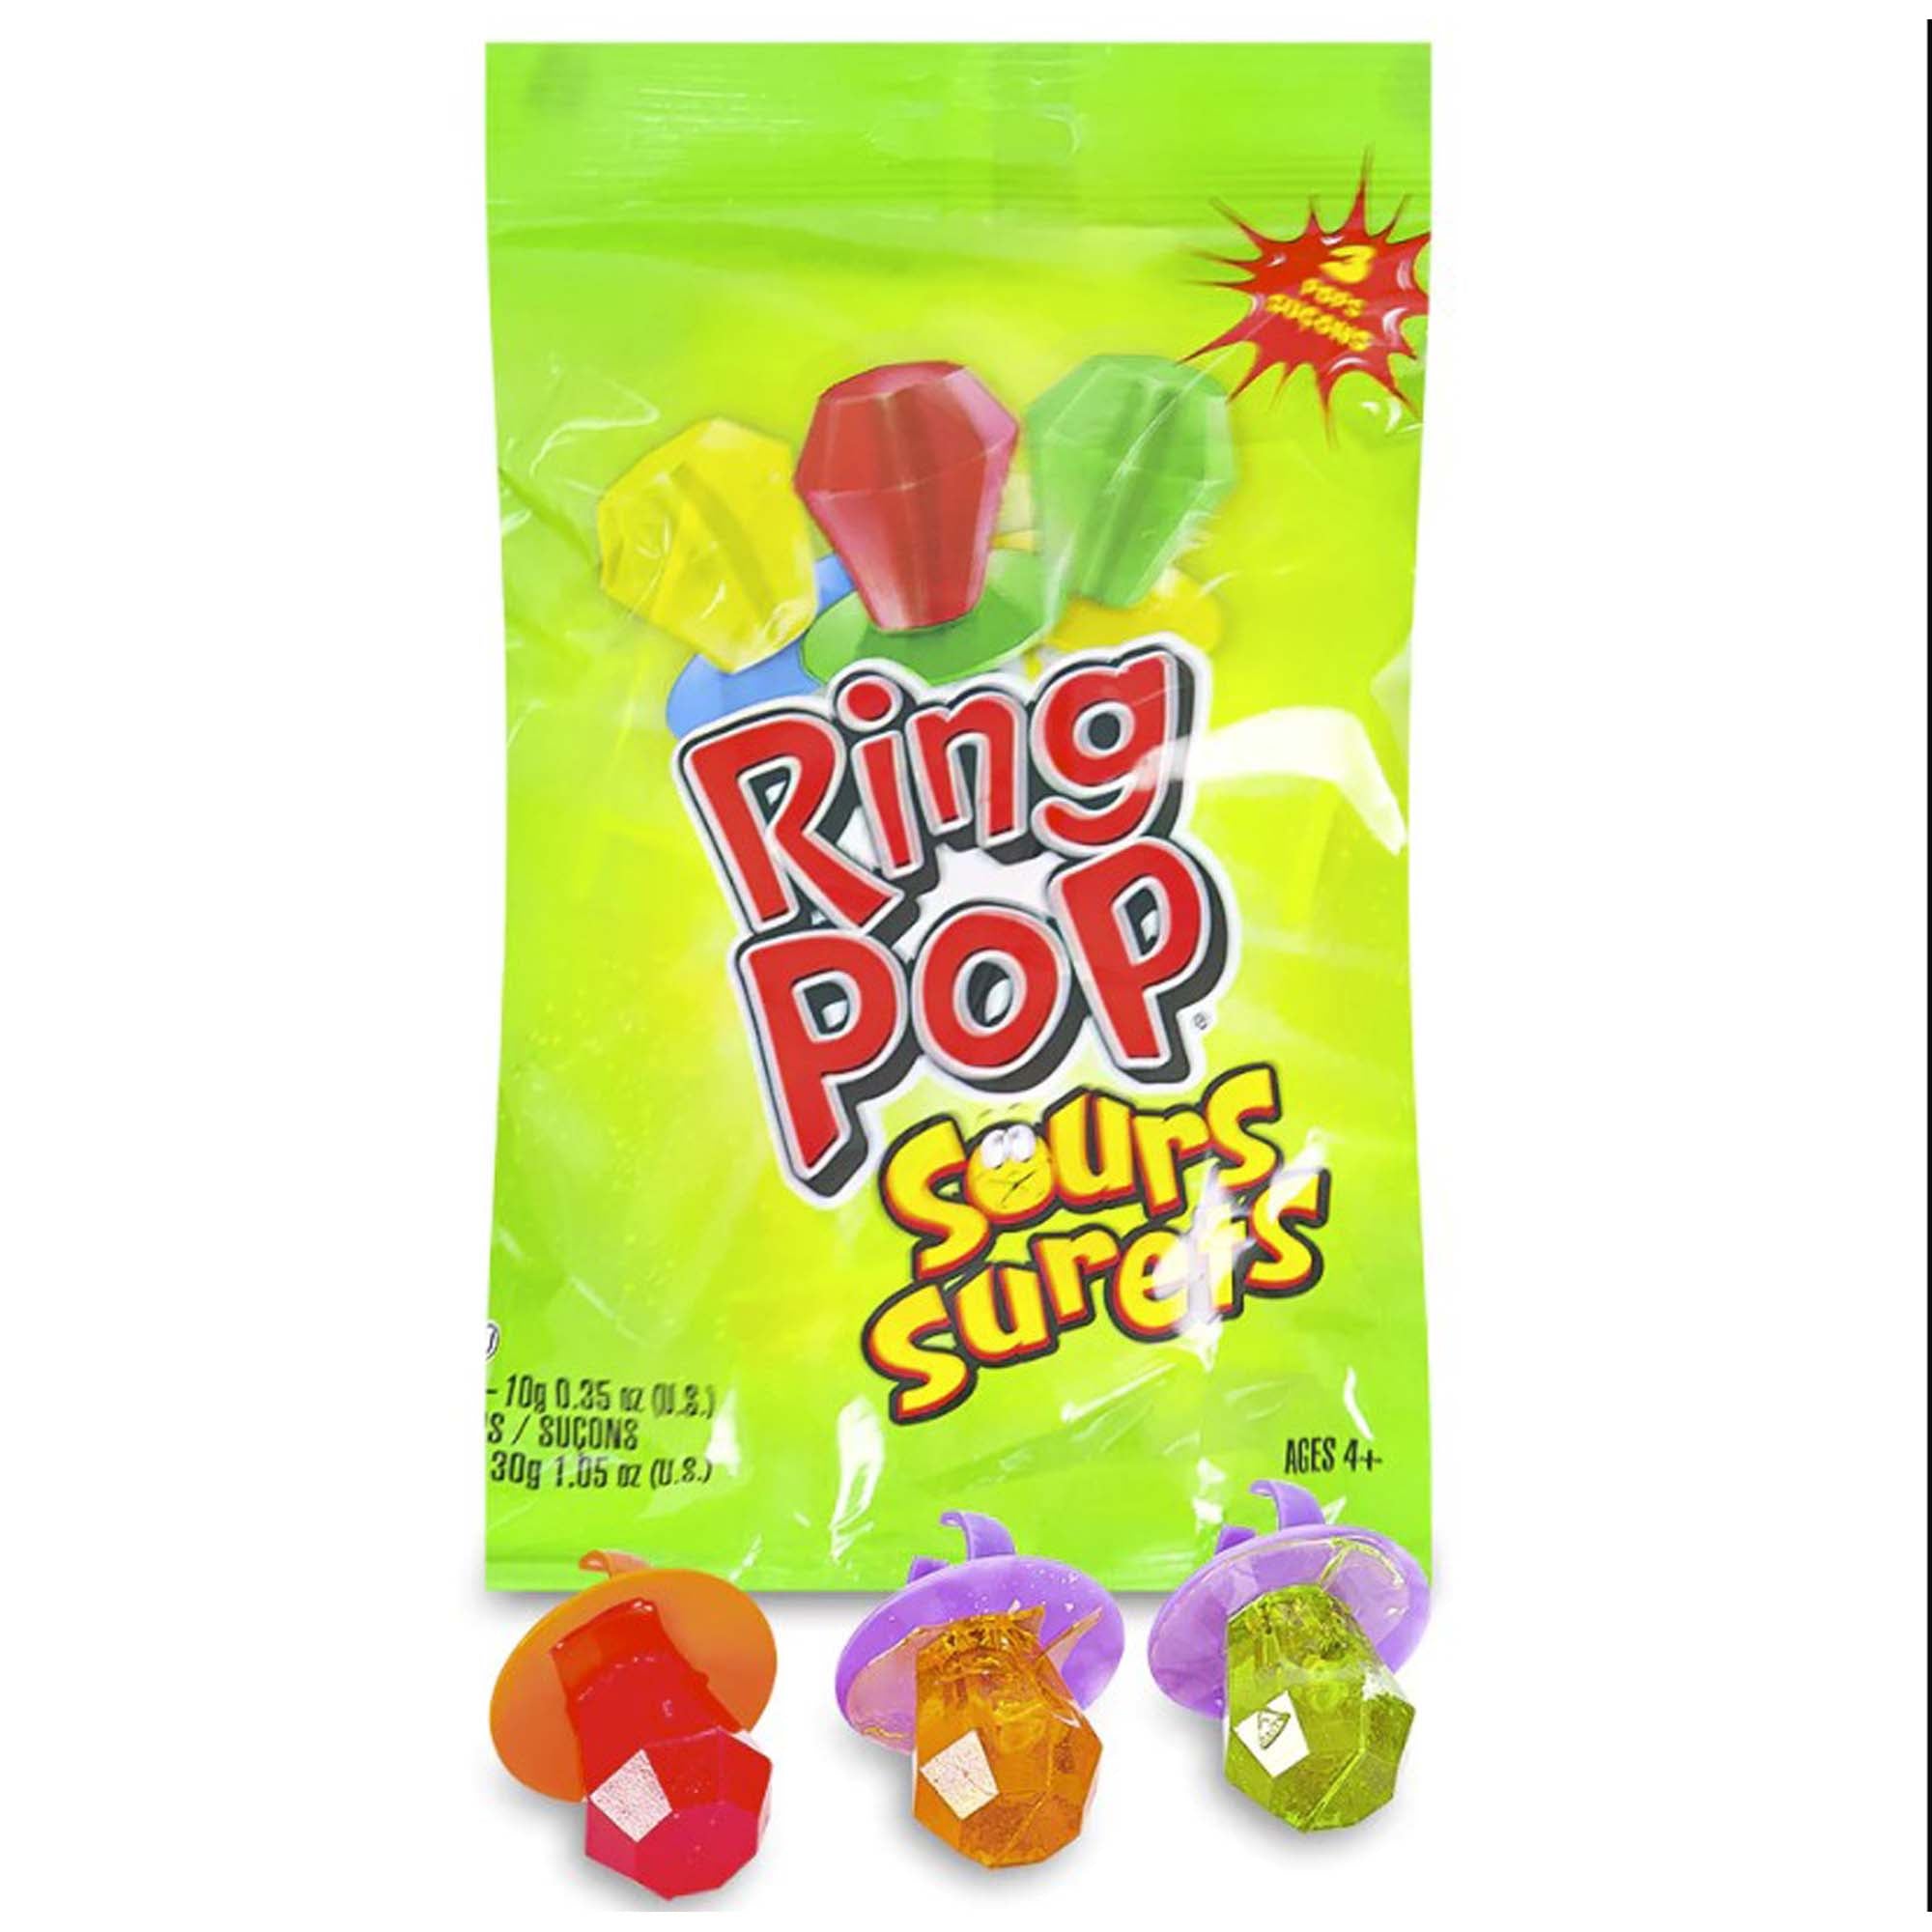 Ring Pop Sour Bag Candies, 30g, 3 Count